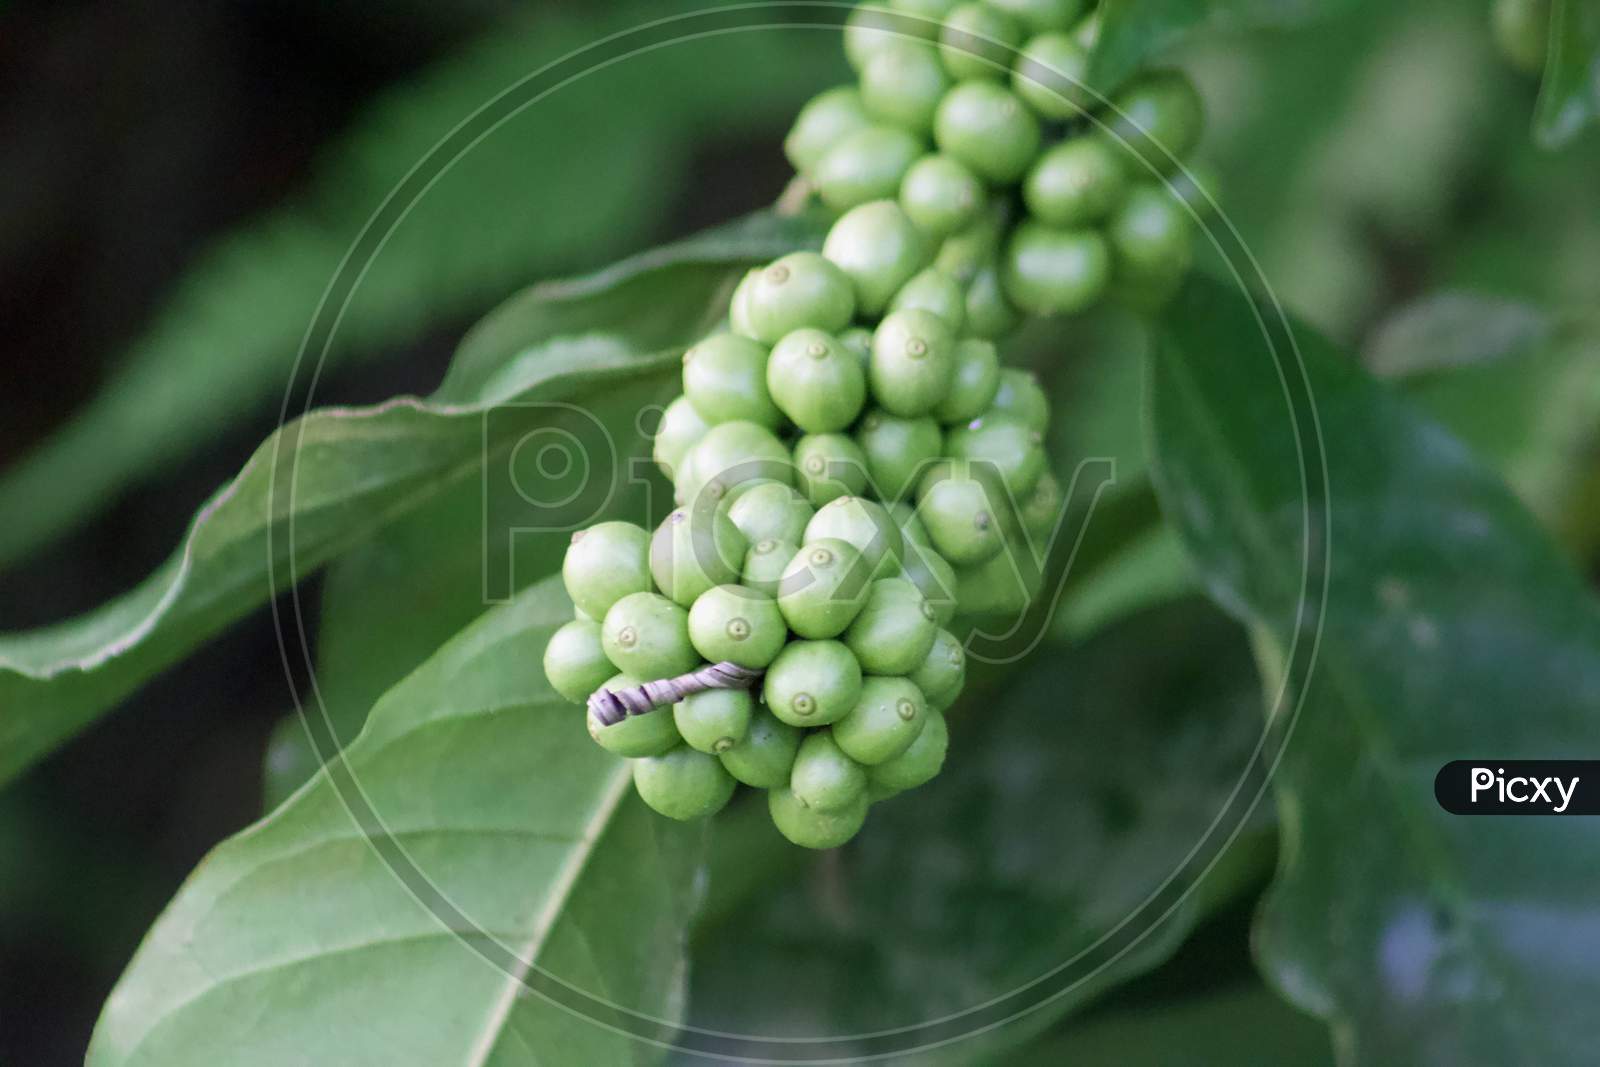 Raw Coffee Beans on a coffee plant